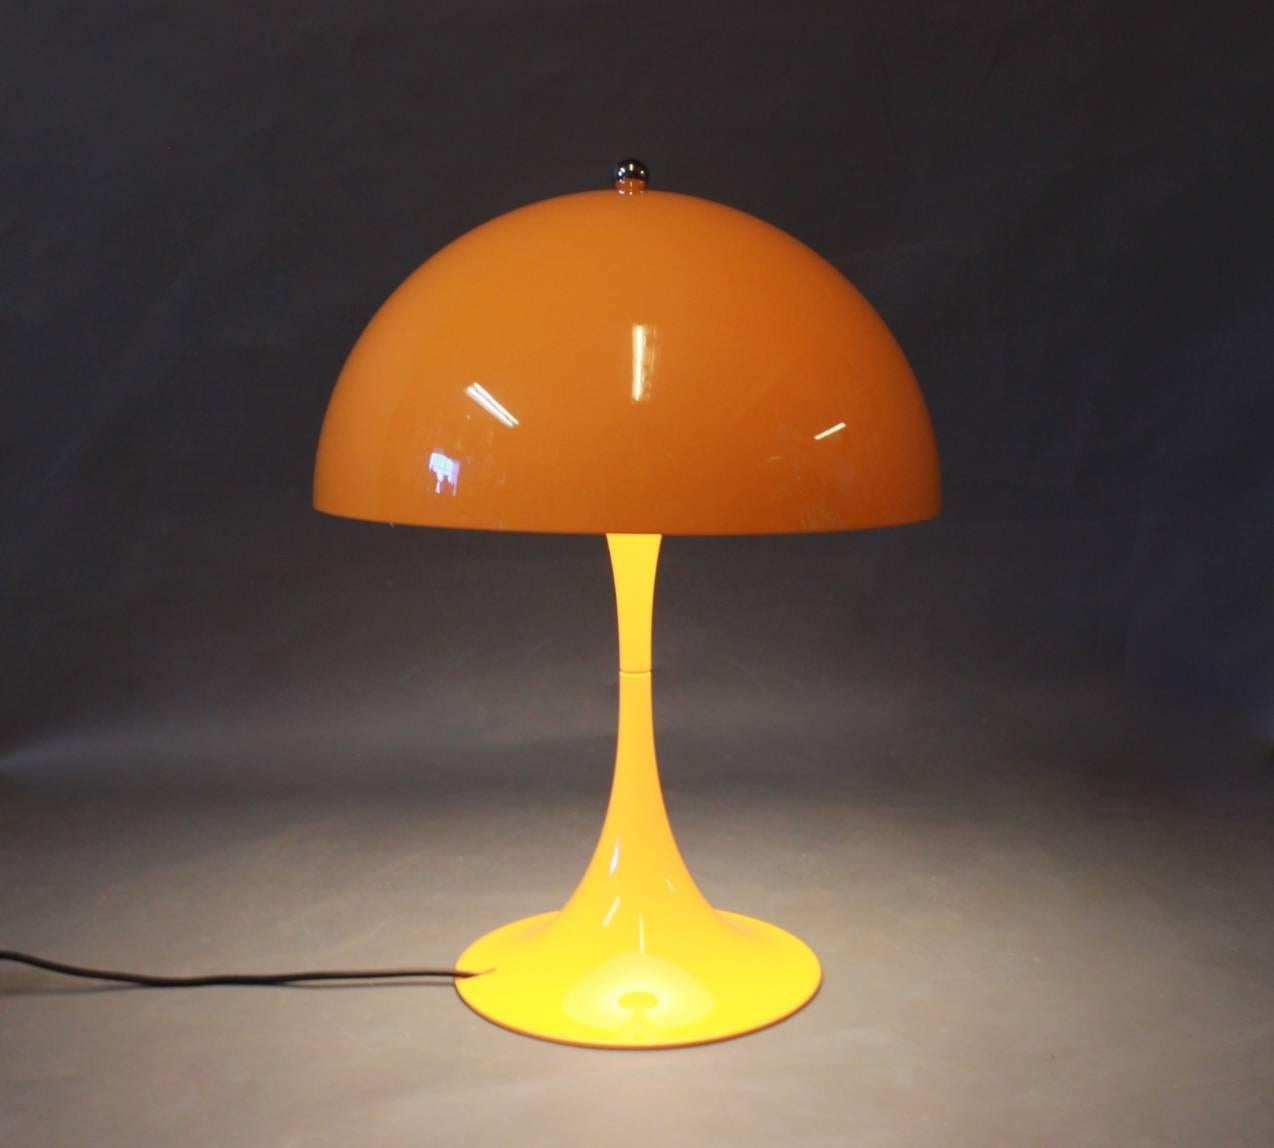 Orange Panthella mini table lamp designed upon by Verner Panton's designs from 1971 and manufactured by Louis Poulsen. The shade is of metal, the foot of plast and has three different light settings.